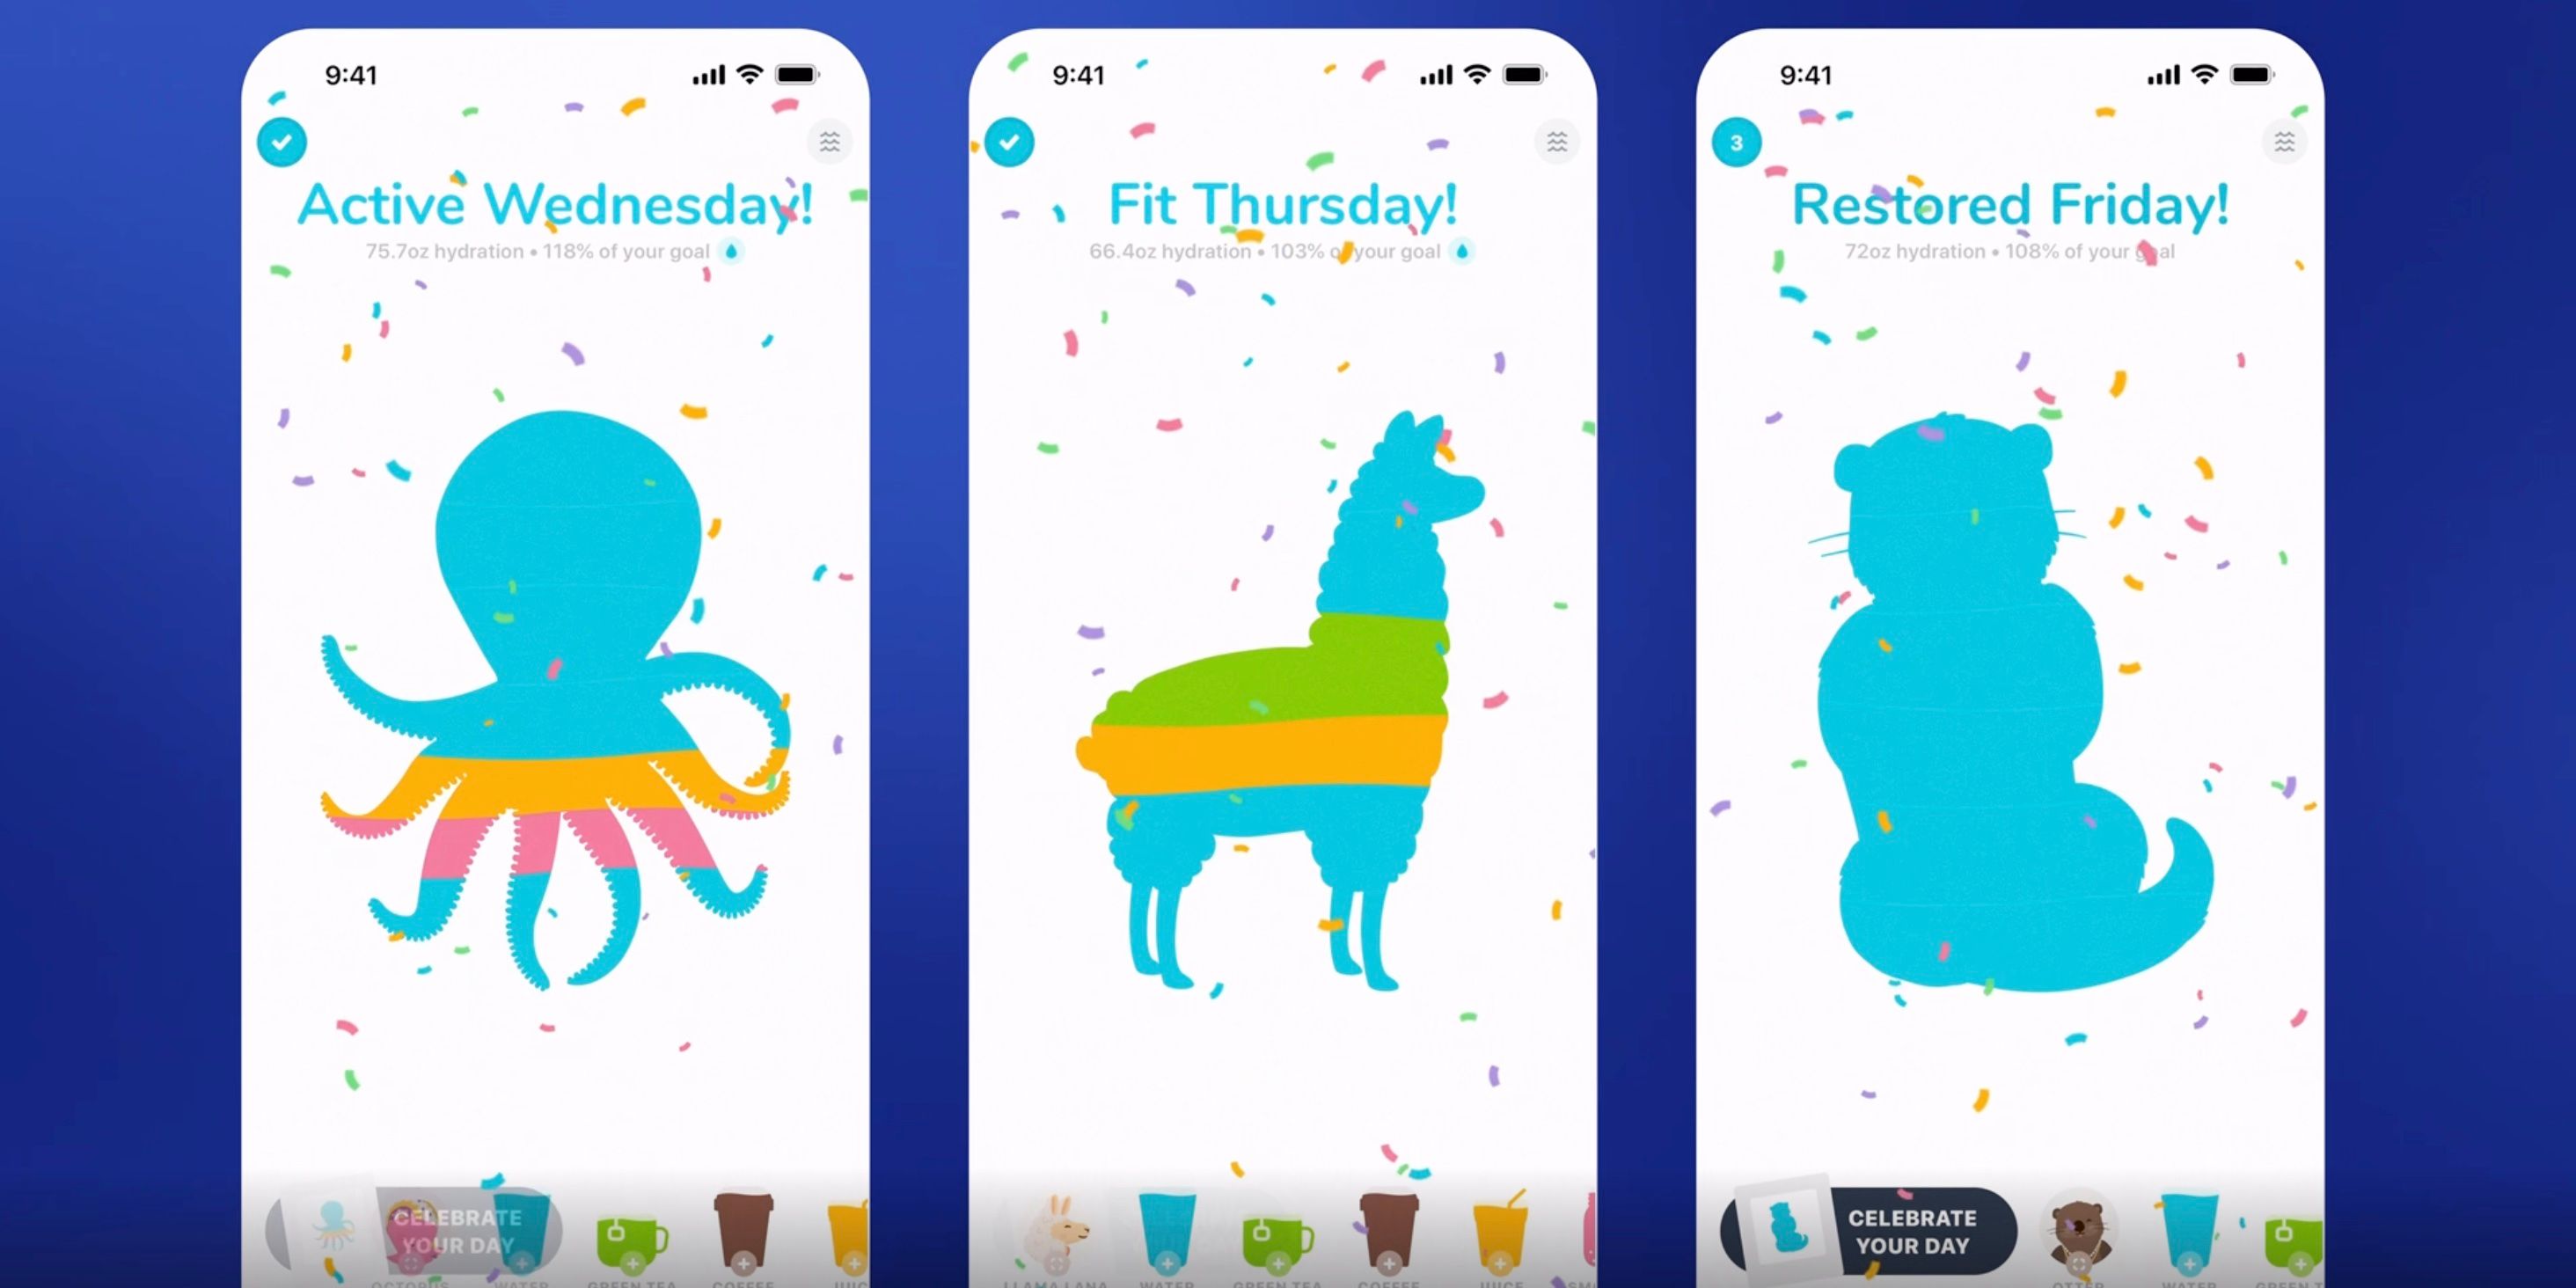 Three screenshots on an iPhone screen show silhouettes of an octopus, a llama and an otter and encouraging words around wellness